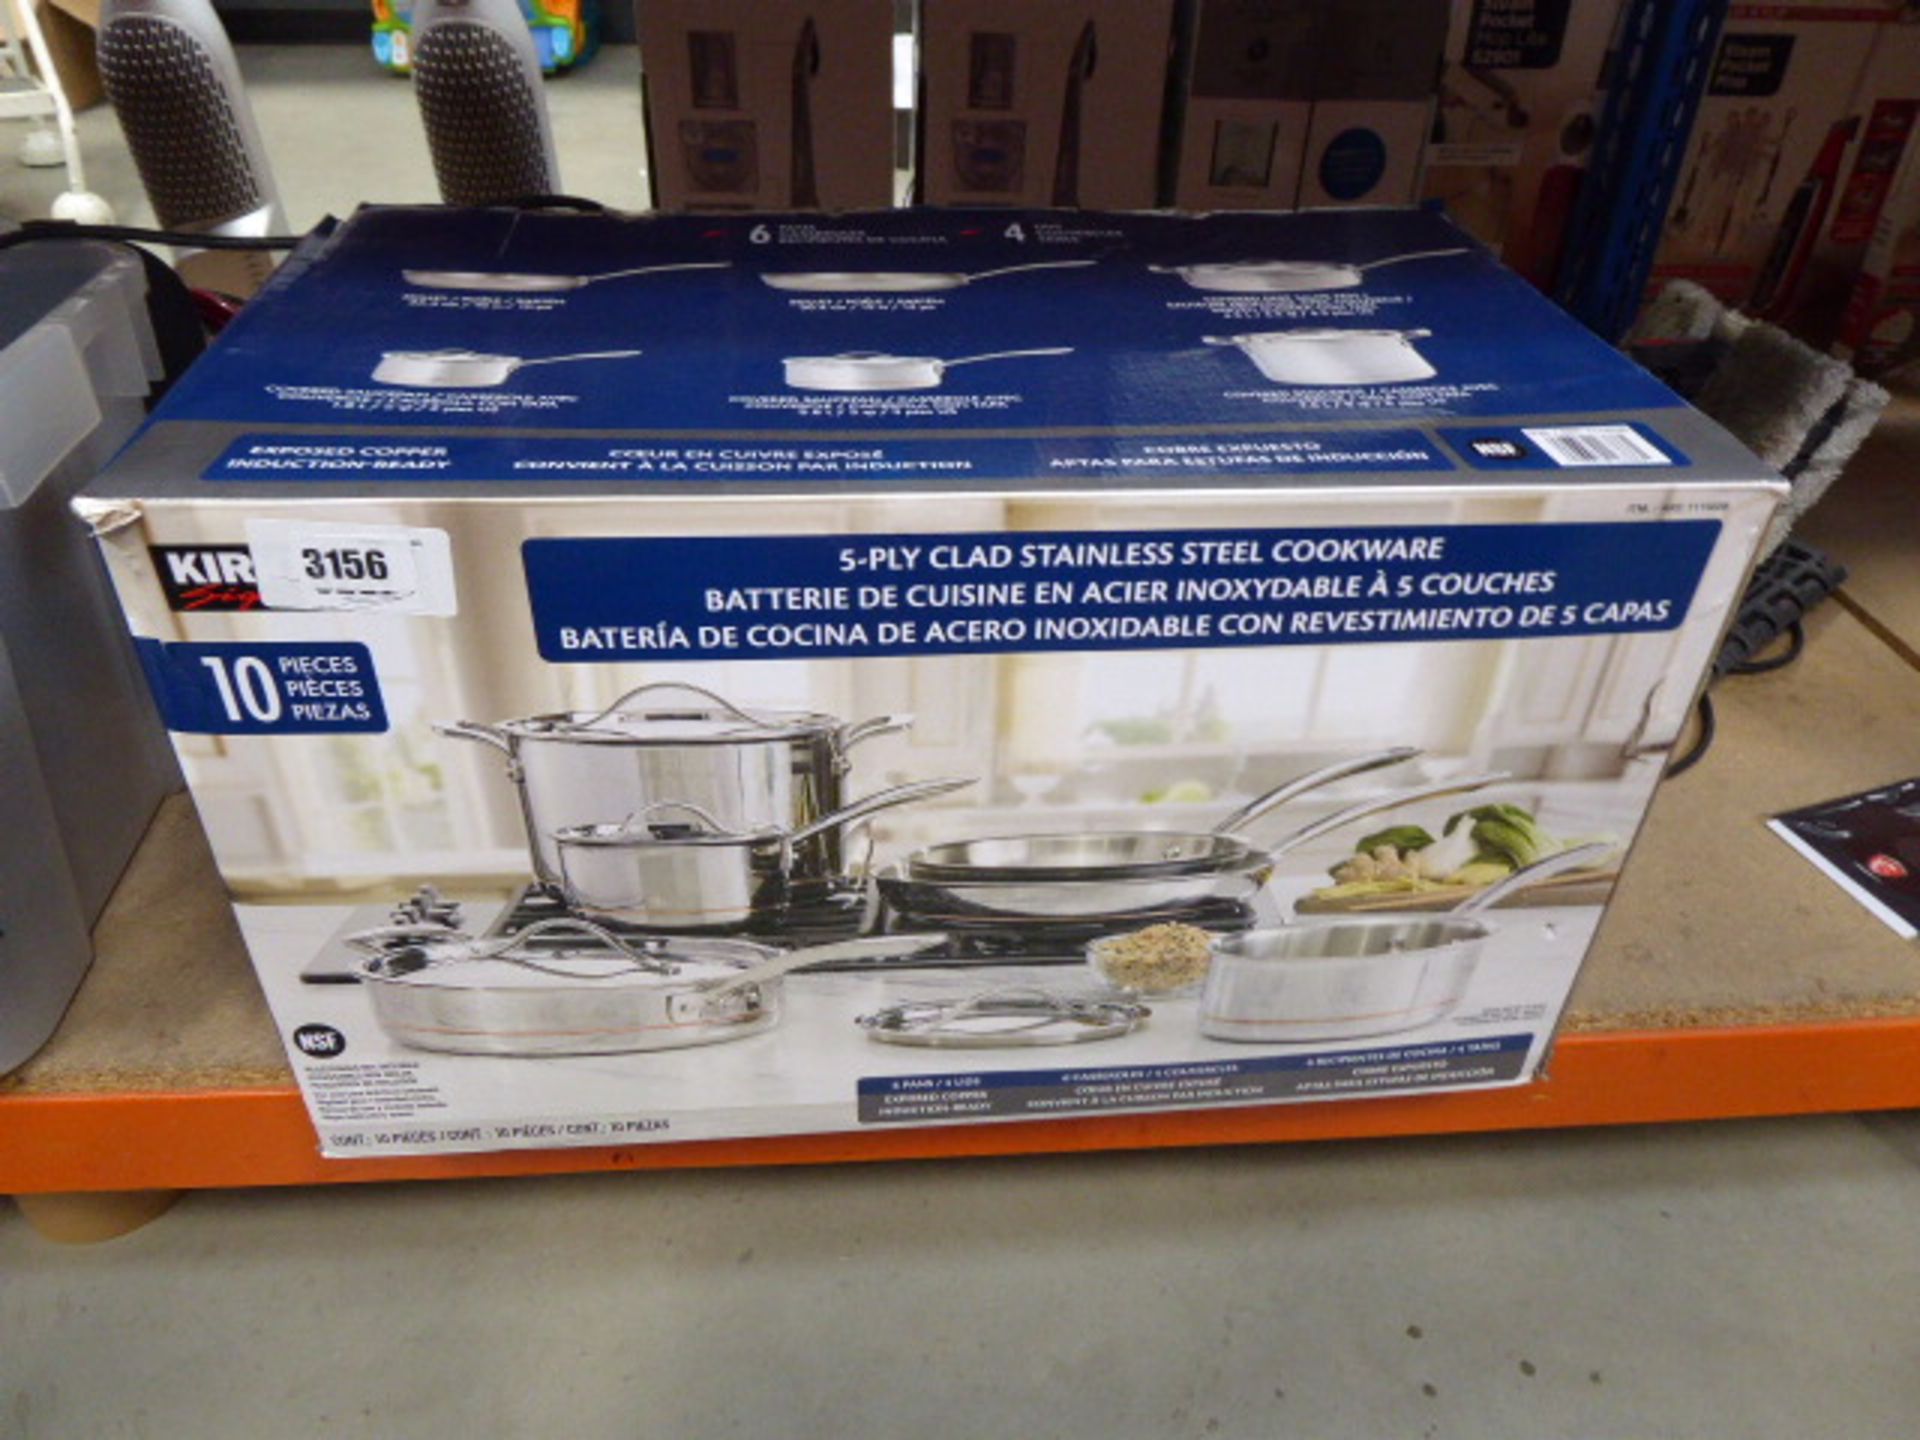 3237- Boxed Kirkland stainless steel cookware set